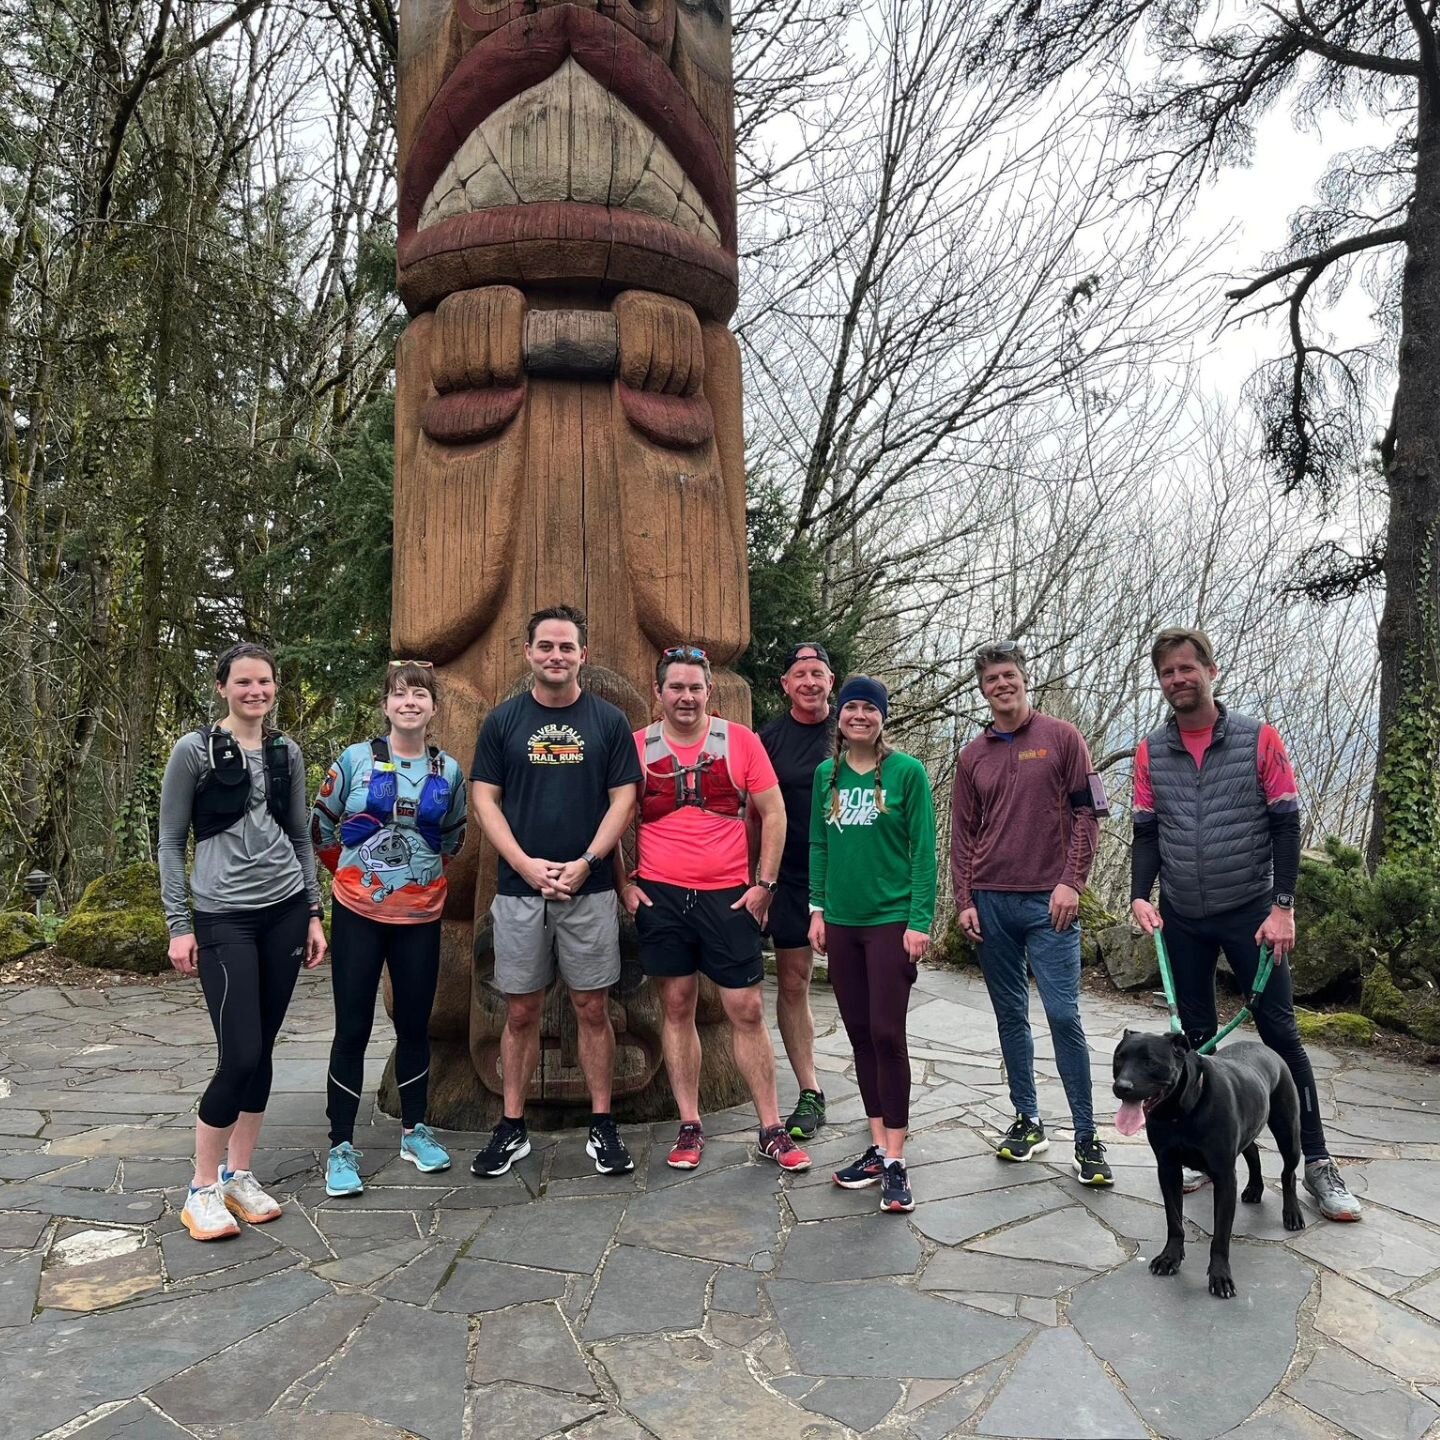 Hills for breakfast! This week's Sunday Shamrock training runs take us to Lower Macleay to Pittock.

Your host is @thedanocles: Meet at Lower Macleay Trailhead at 9:30am and step off at 9:45. The route takes us along Balch Creek--widely believed to b